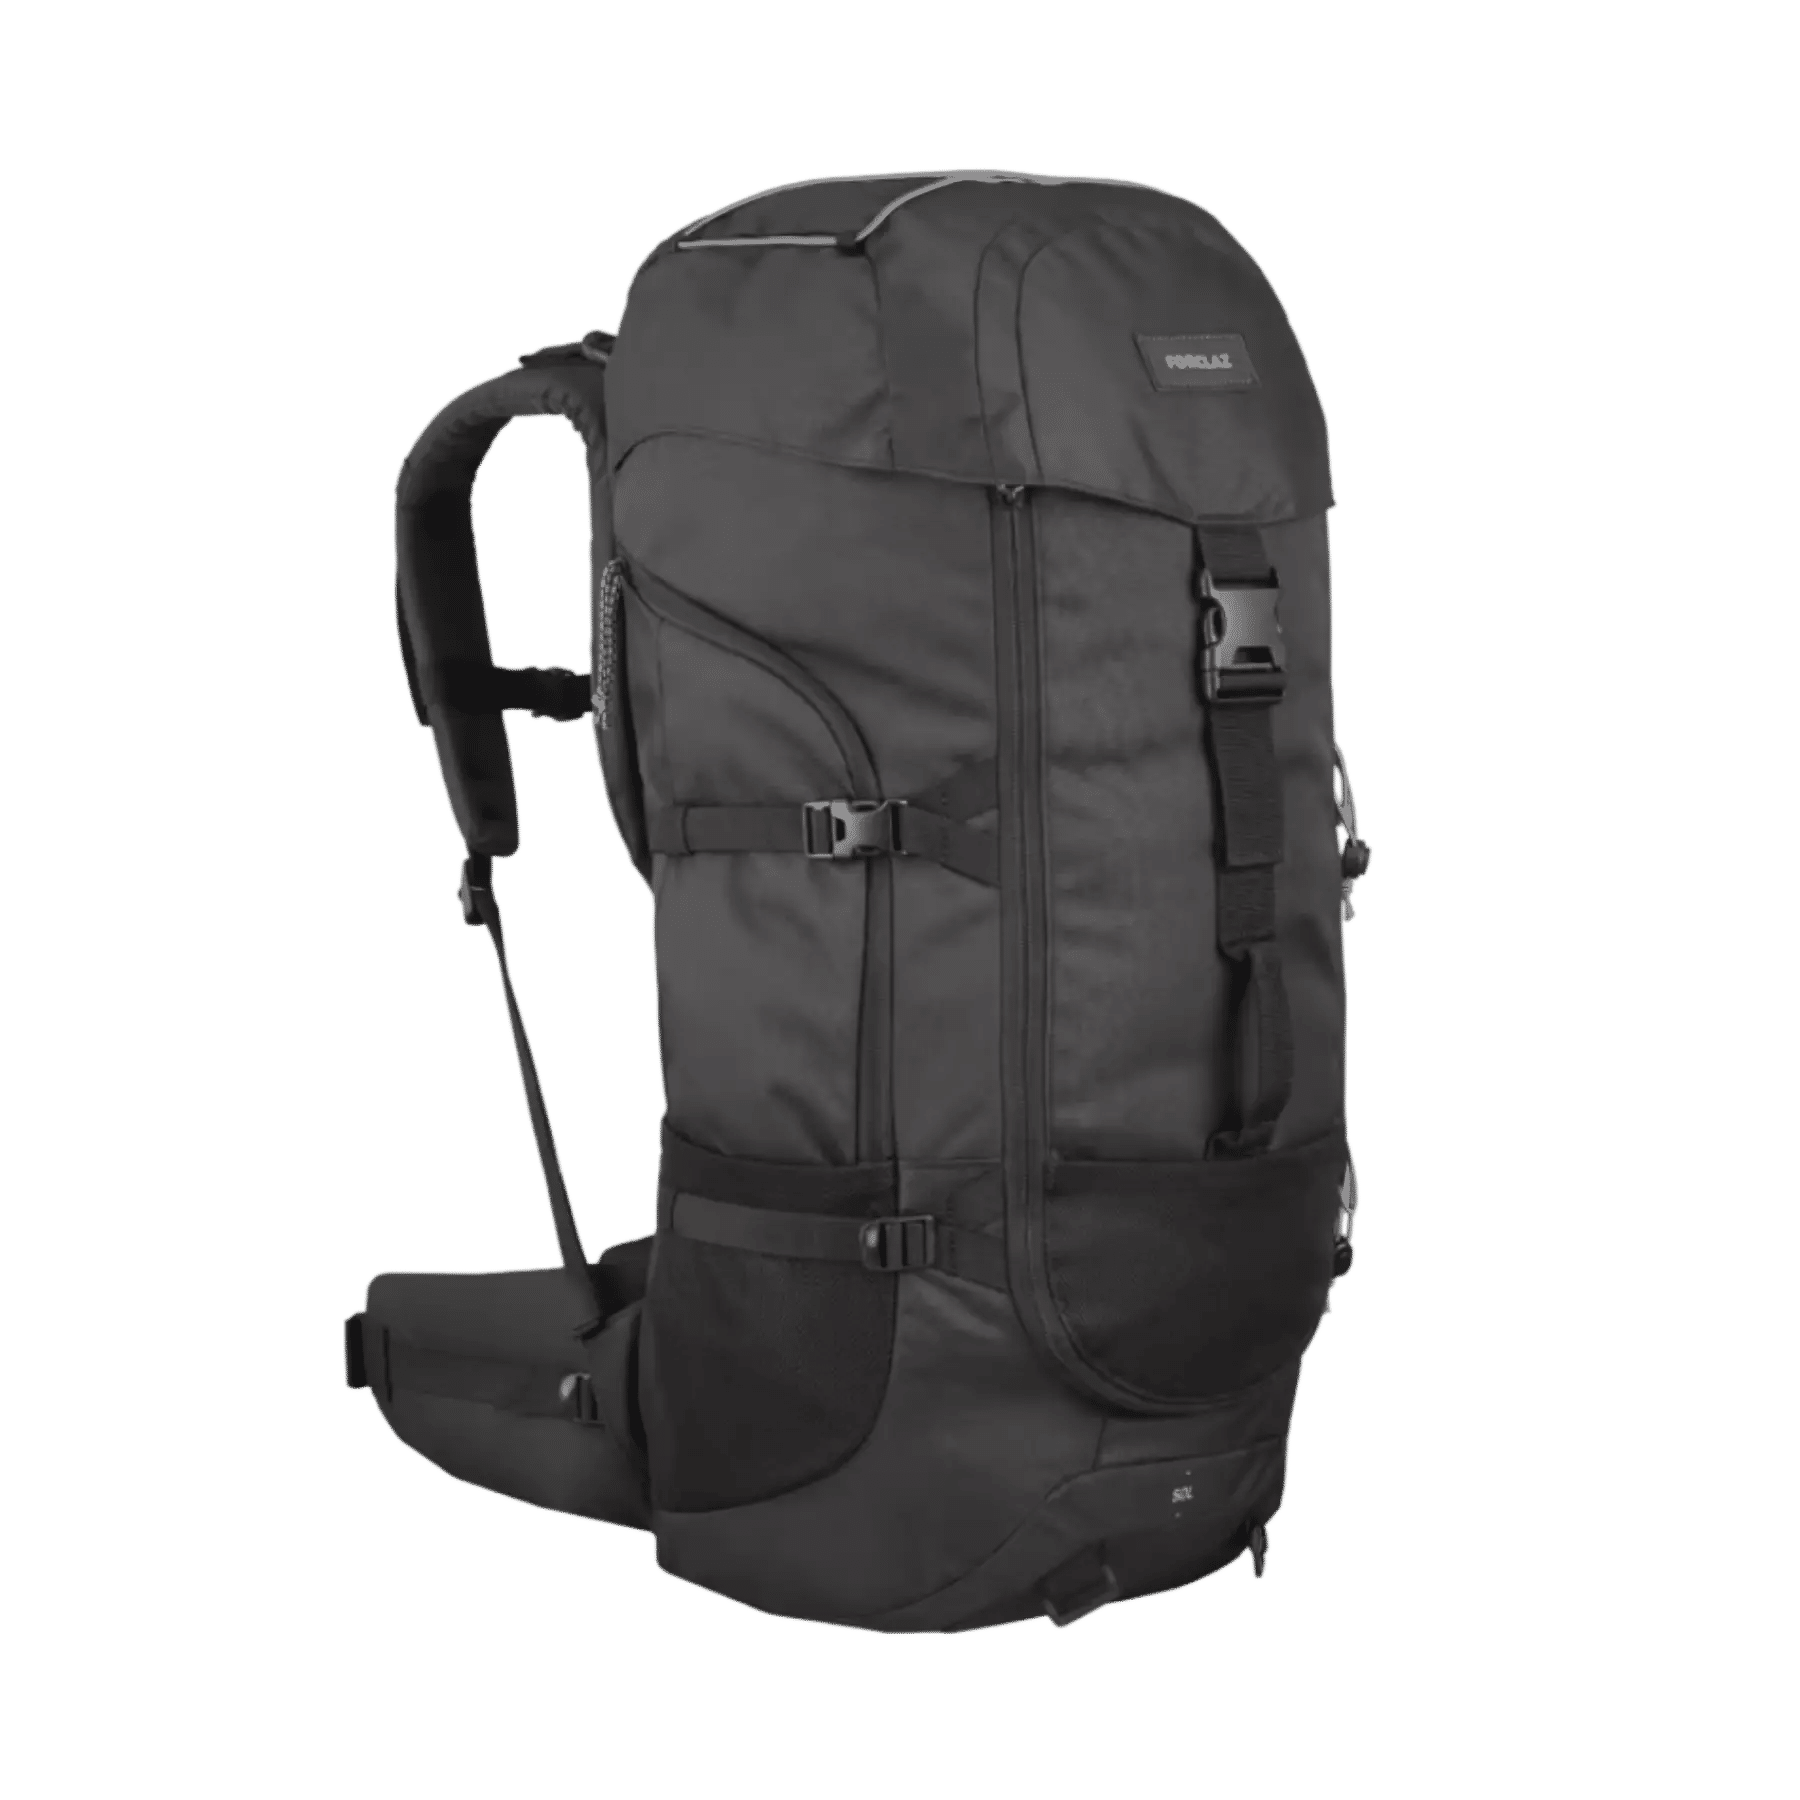 These are product images of 50L Backpack on rent by SharePal.